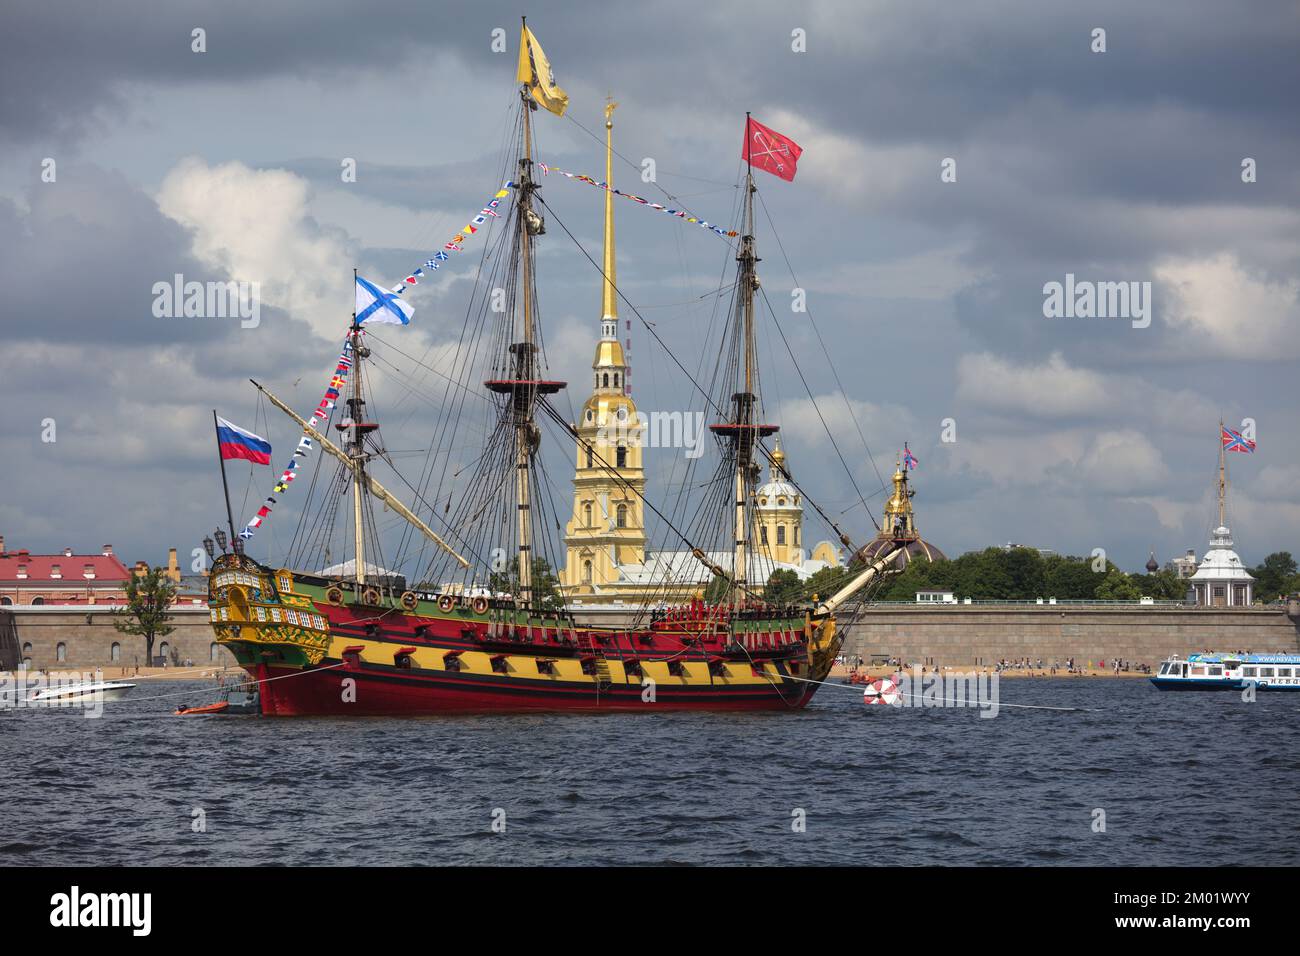 Ship of the line Poltava, the replica of historical ship, anchored in Neva river against St. Peter and Paul cathedral in St. Petersburg, Russia Stock Photo